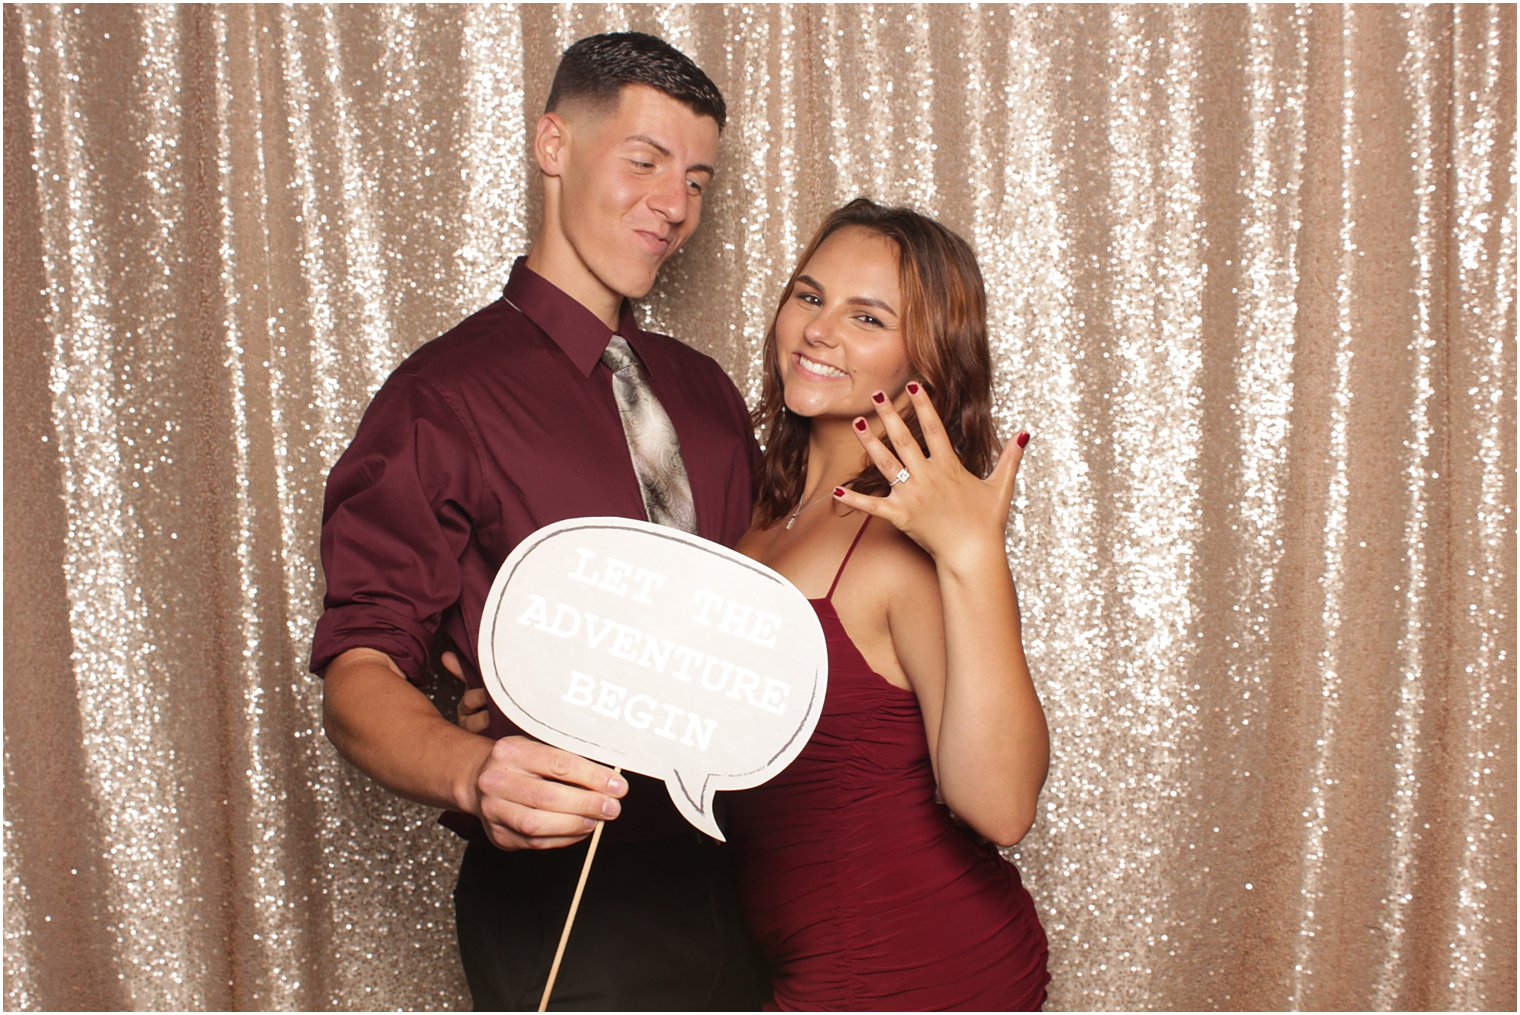 engaged couple shows off woman's ring during photo booth photos 